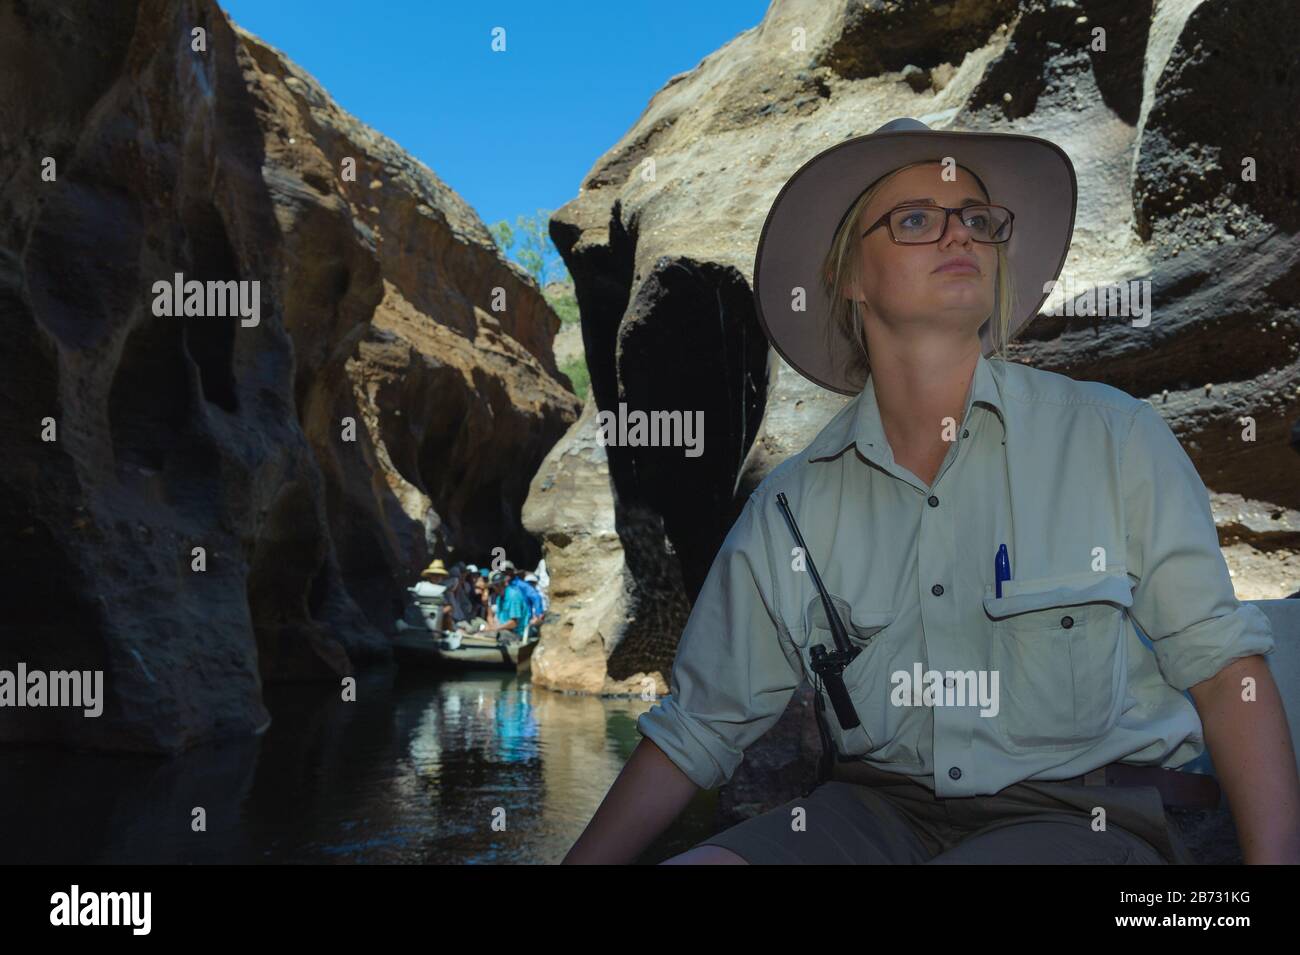 Cobbold Gorge female tour guide, steers her tour boat along the narrow gorge walls as another tour guide boat approaches from behind. Stock Photo